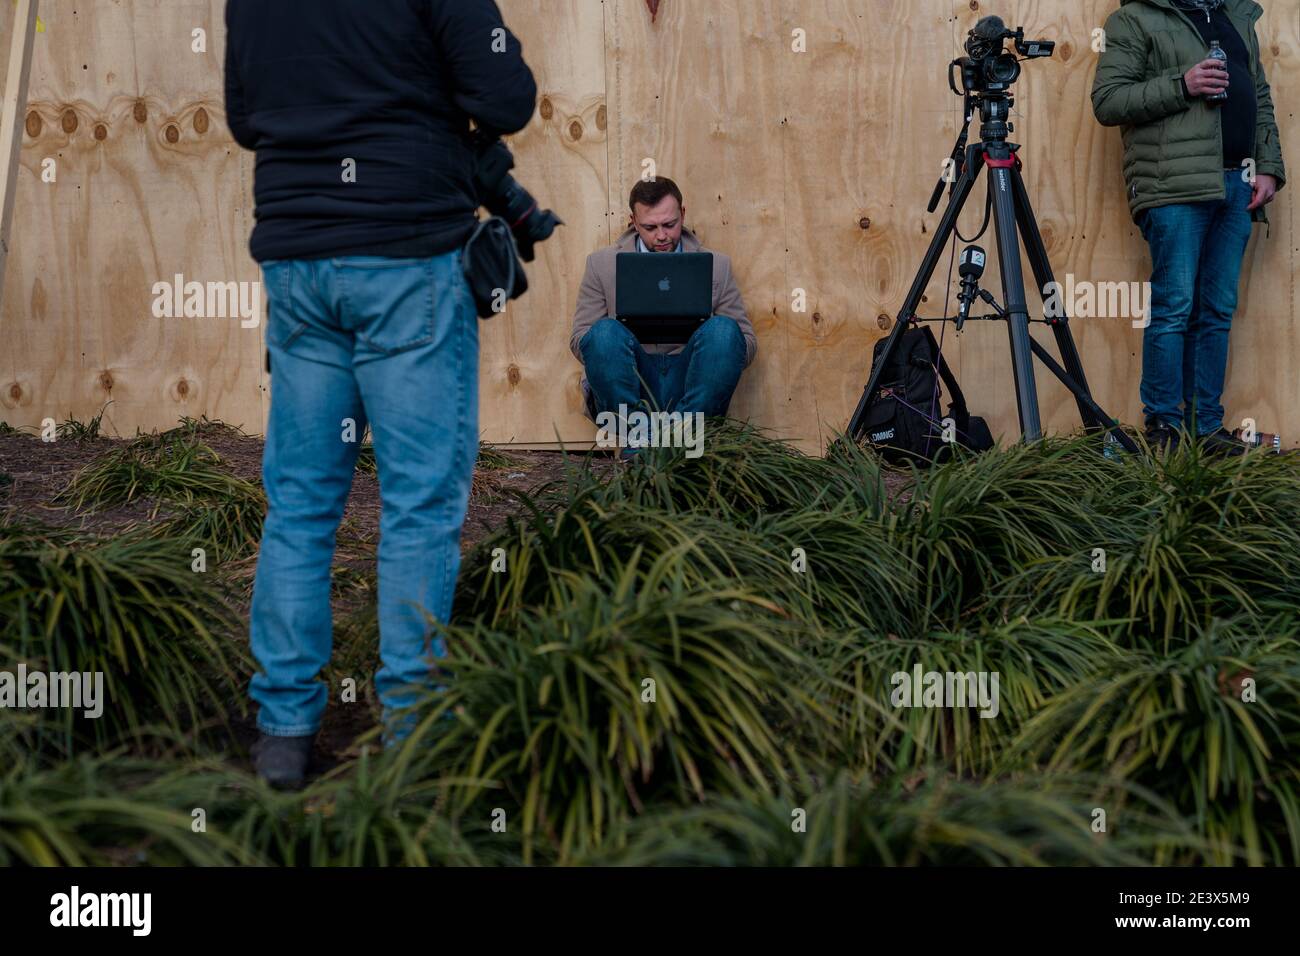 Washington, District of Columbua, USA. 20th Jan, 2021. A member of the press works on their laptop while sitting in a landscaped area during inauguration day. Credit: Jungho Kim/ZUMA Wire/Alamy Live News Stock Photo